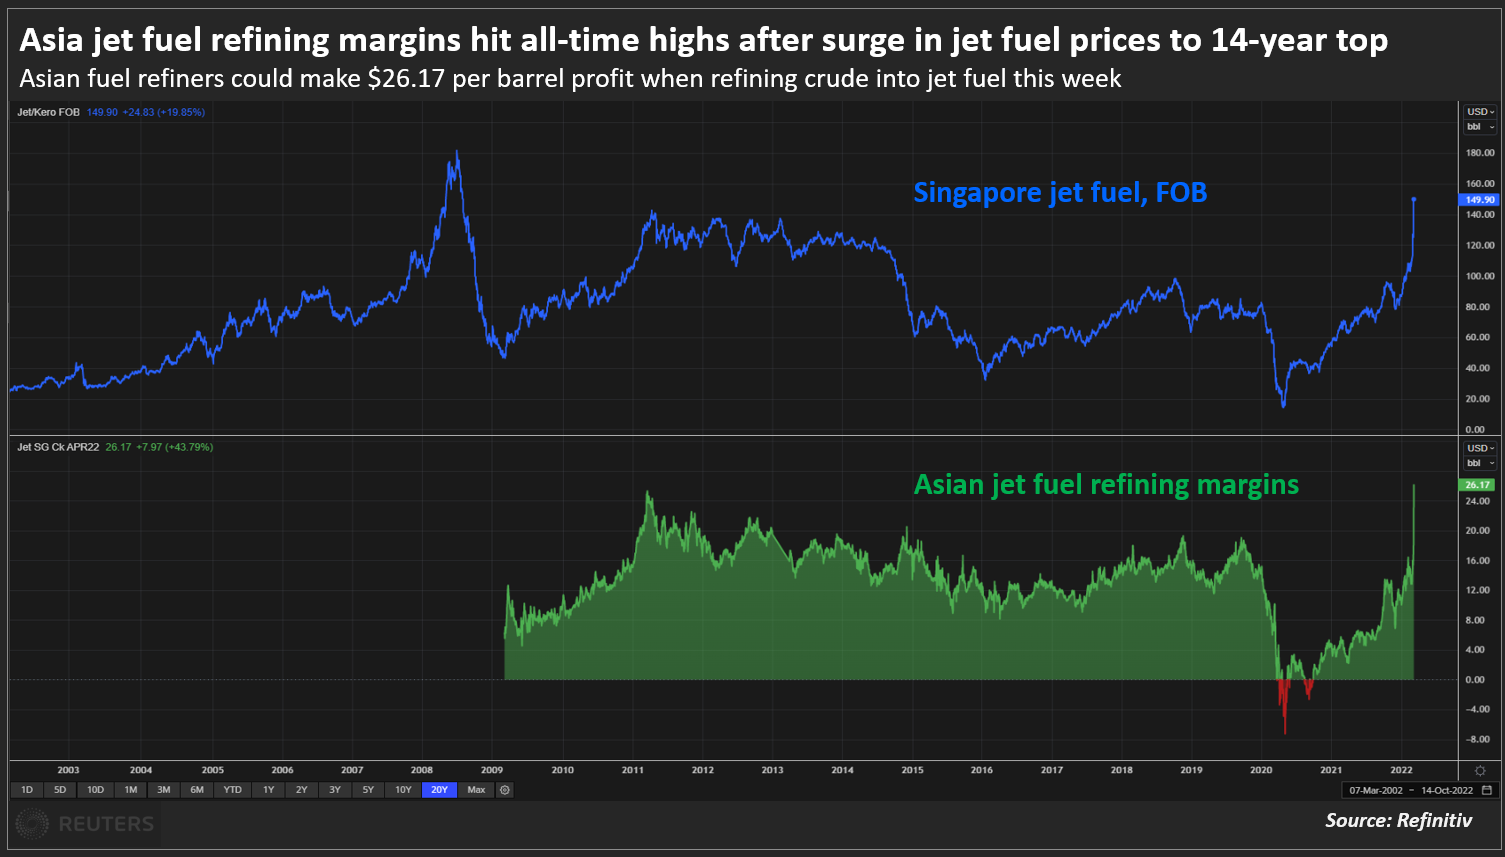 Asia jet fuel refining margins hit all-time highs after surge in jet fuel prices to 14-year top